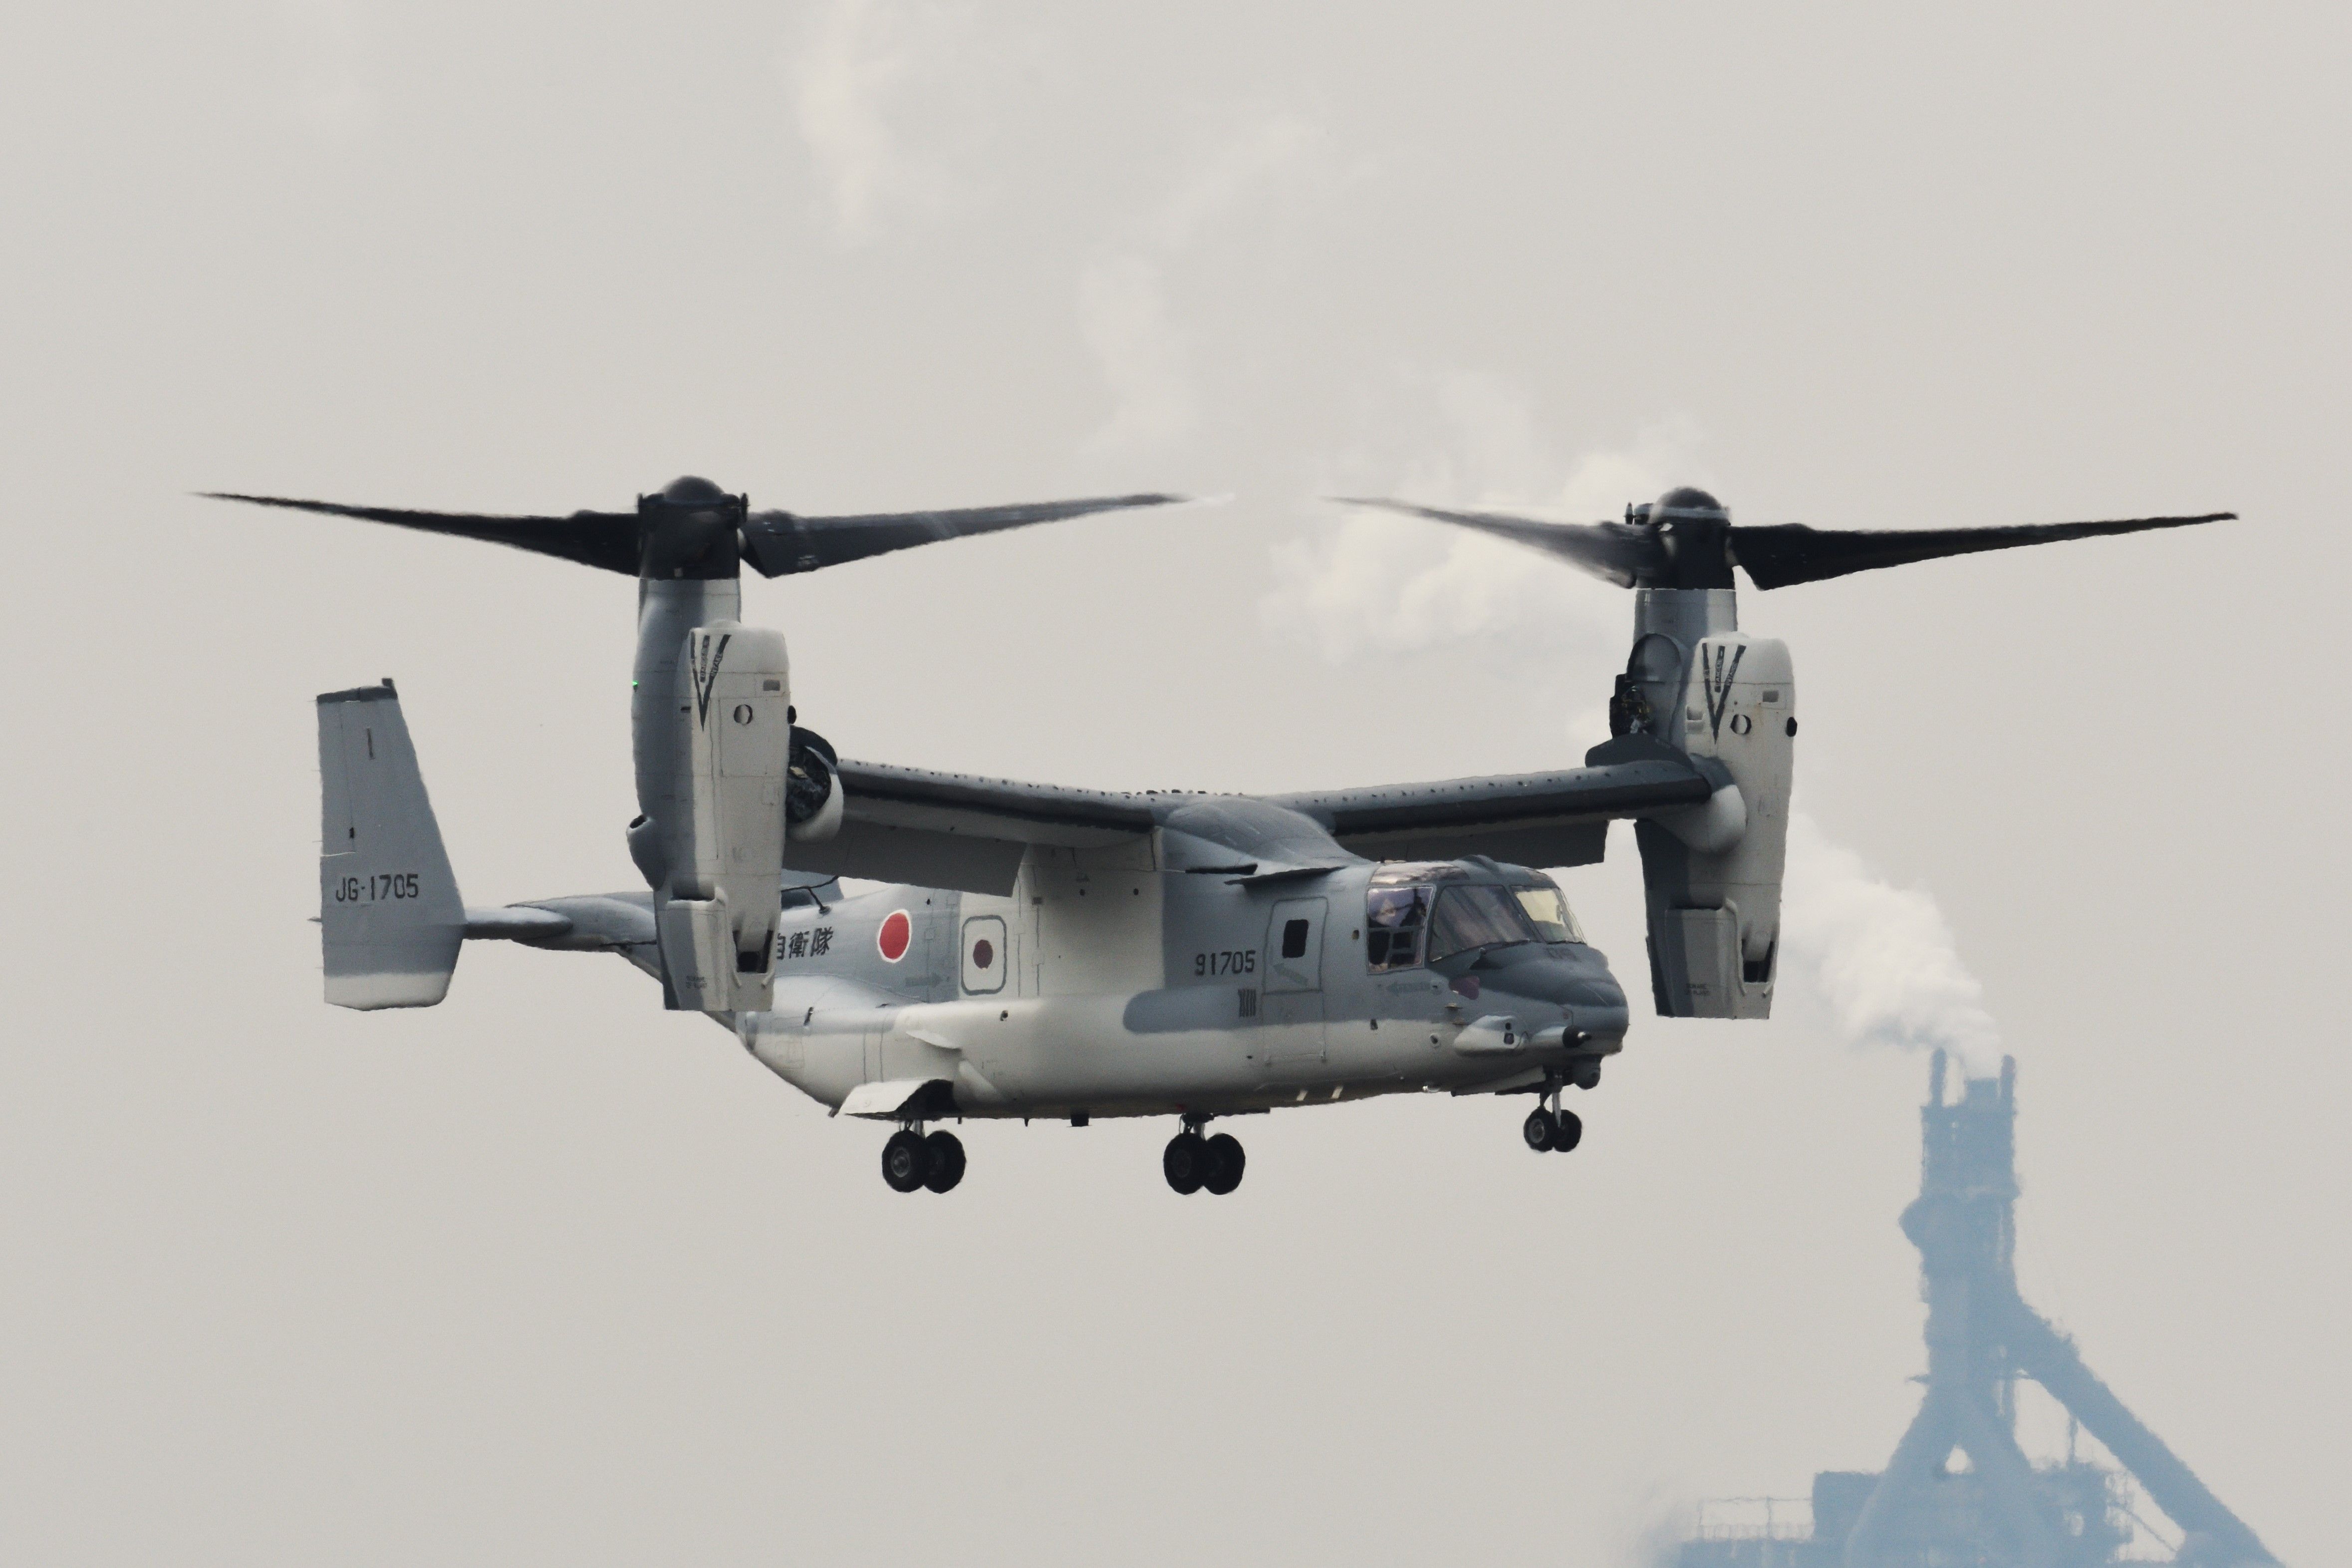 A Japan Ground Self-Defense Force Bell Boeing V-22 Osprey tiltrotor military transport aircraft hovering in the sky..